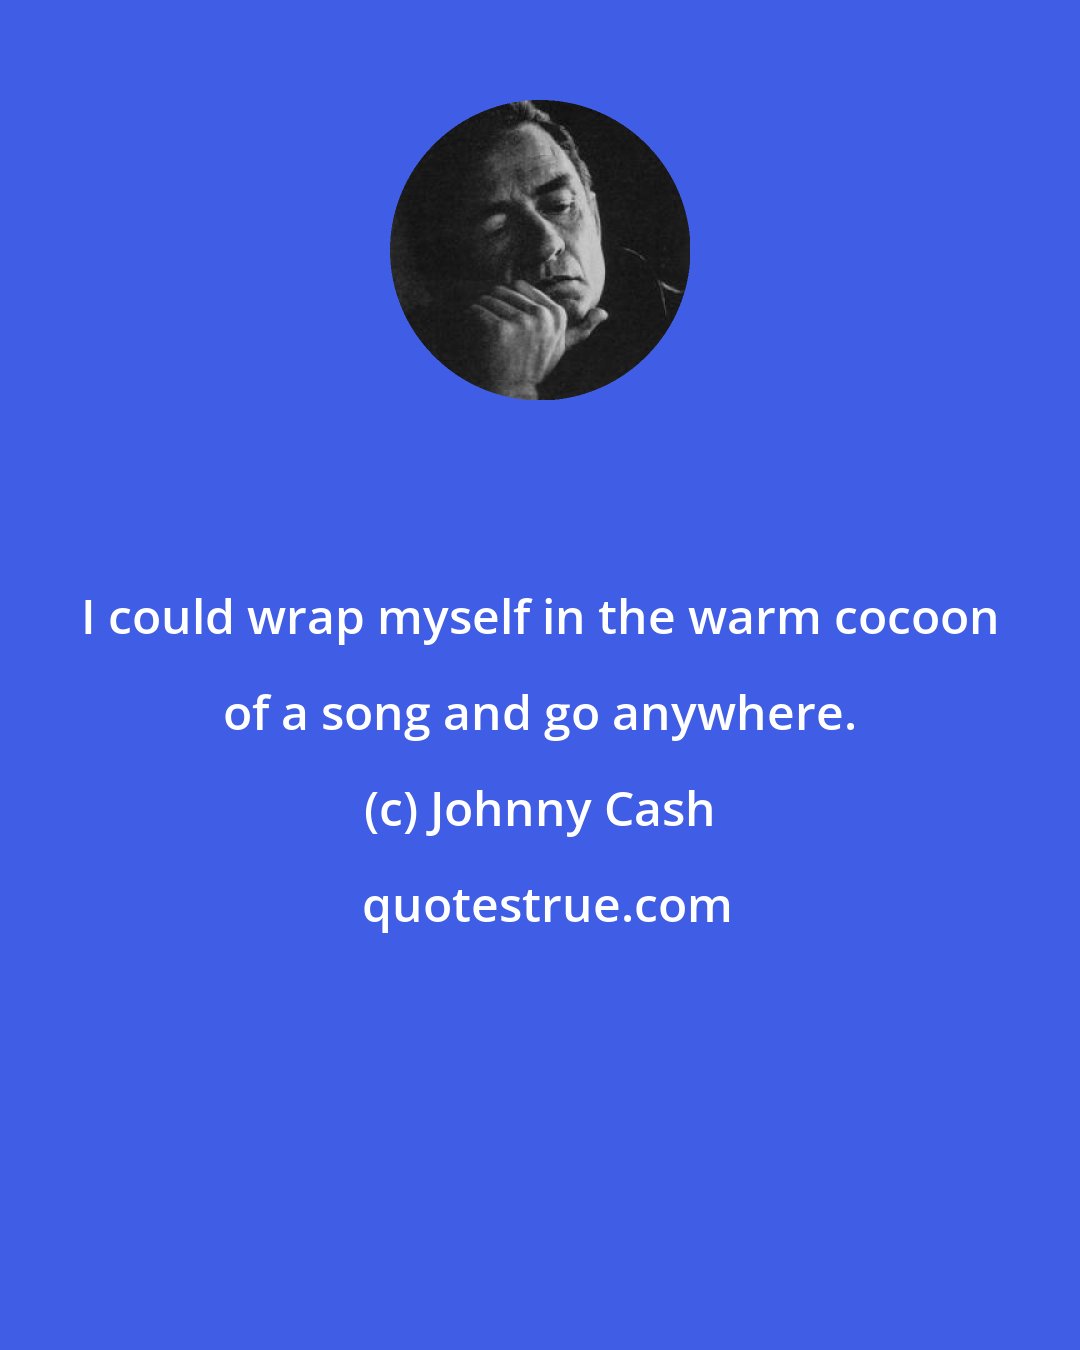 Johnny Cash: I could wrap myself in the warm cocoon of a song and go anywhere.